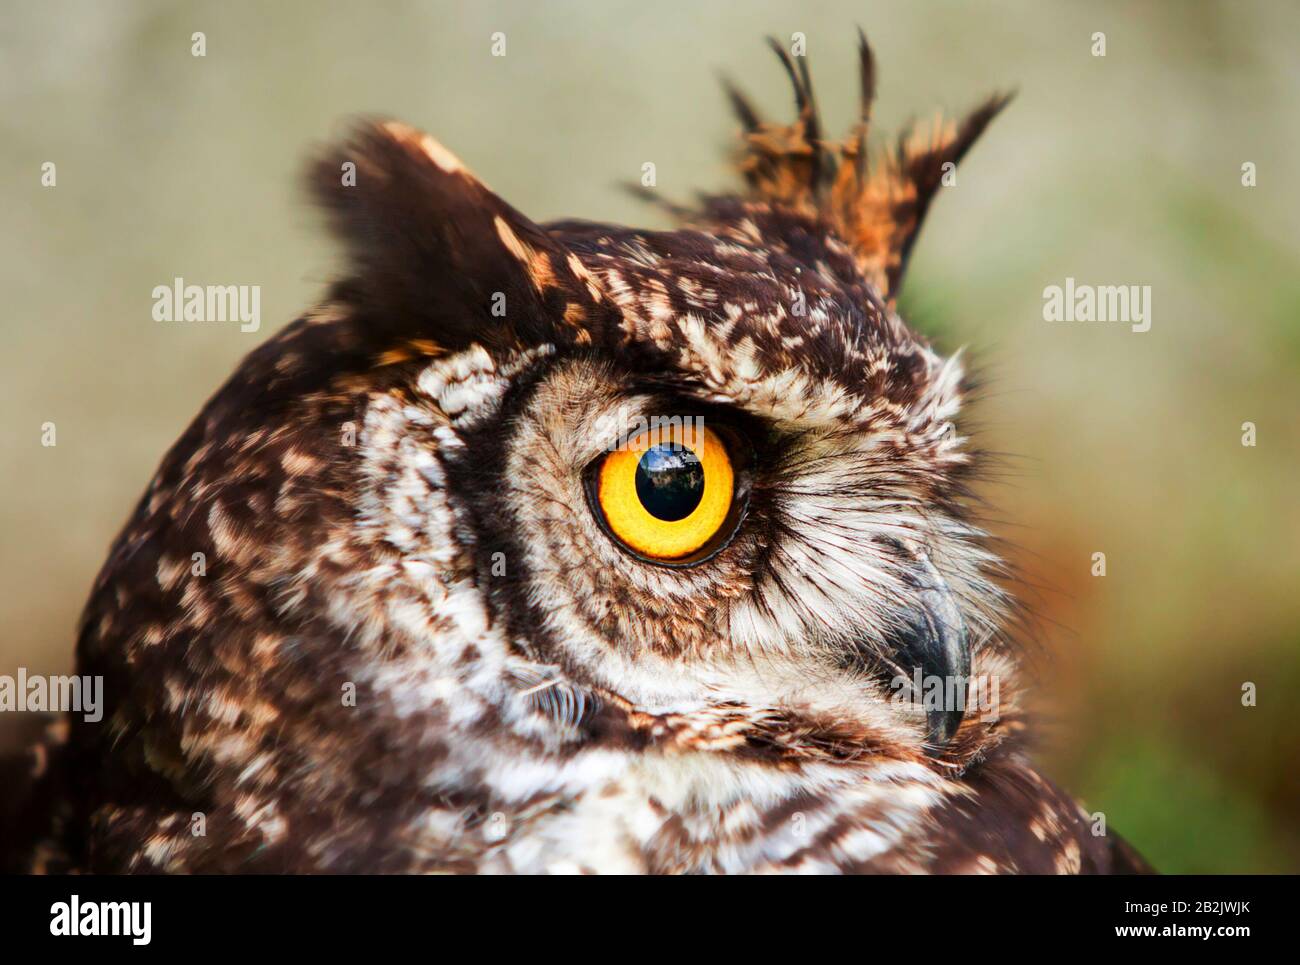 Owls Are The Order Strigiformes Constituting 200 Extant Bird Of Prey Species Most Are Solitary And Nocturnal Stock Photo